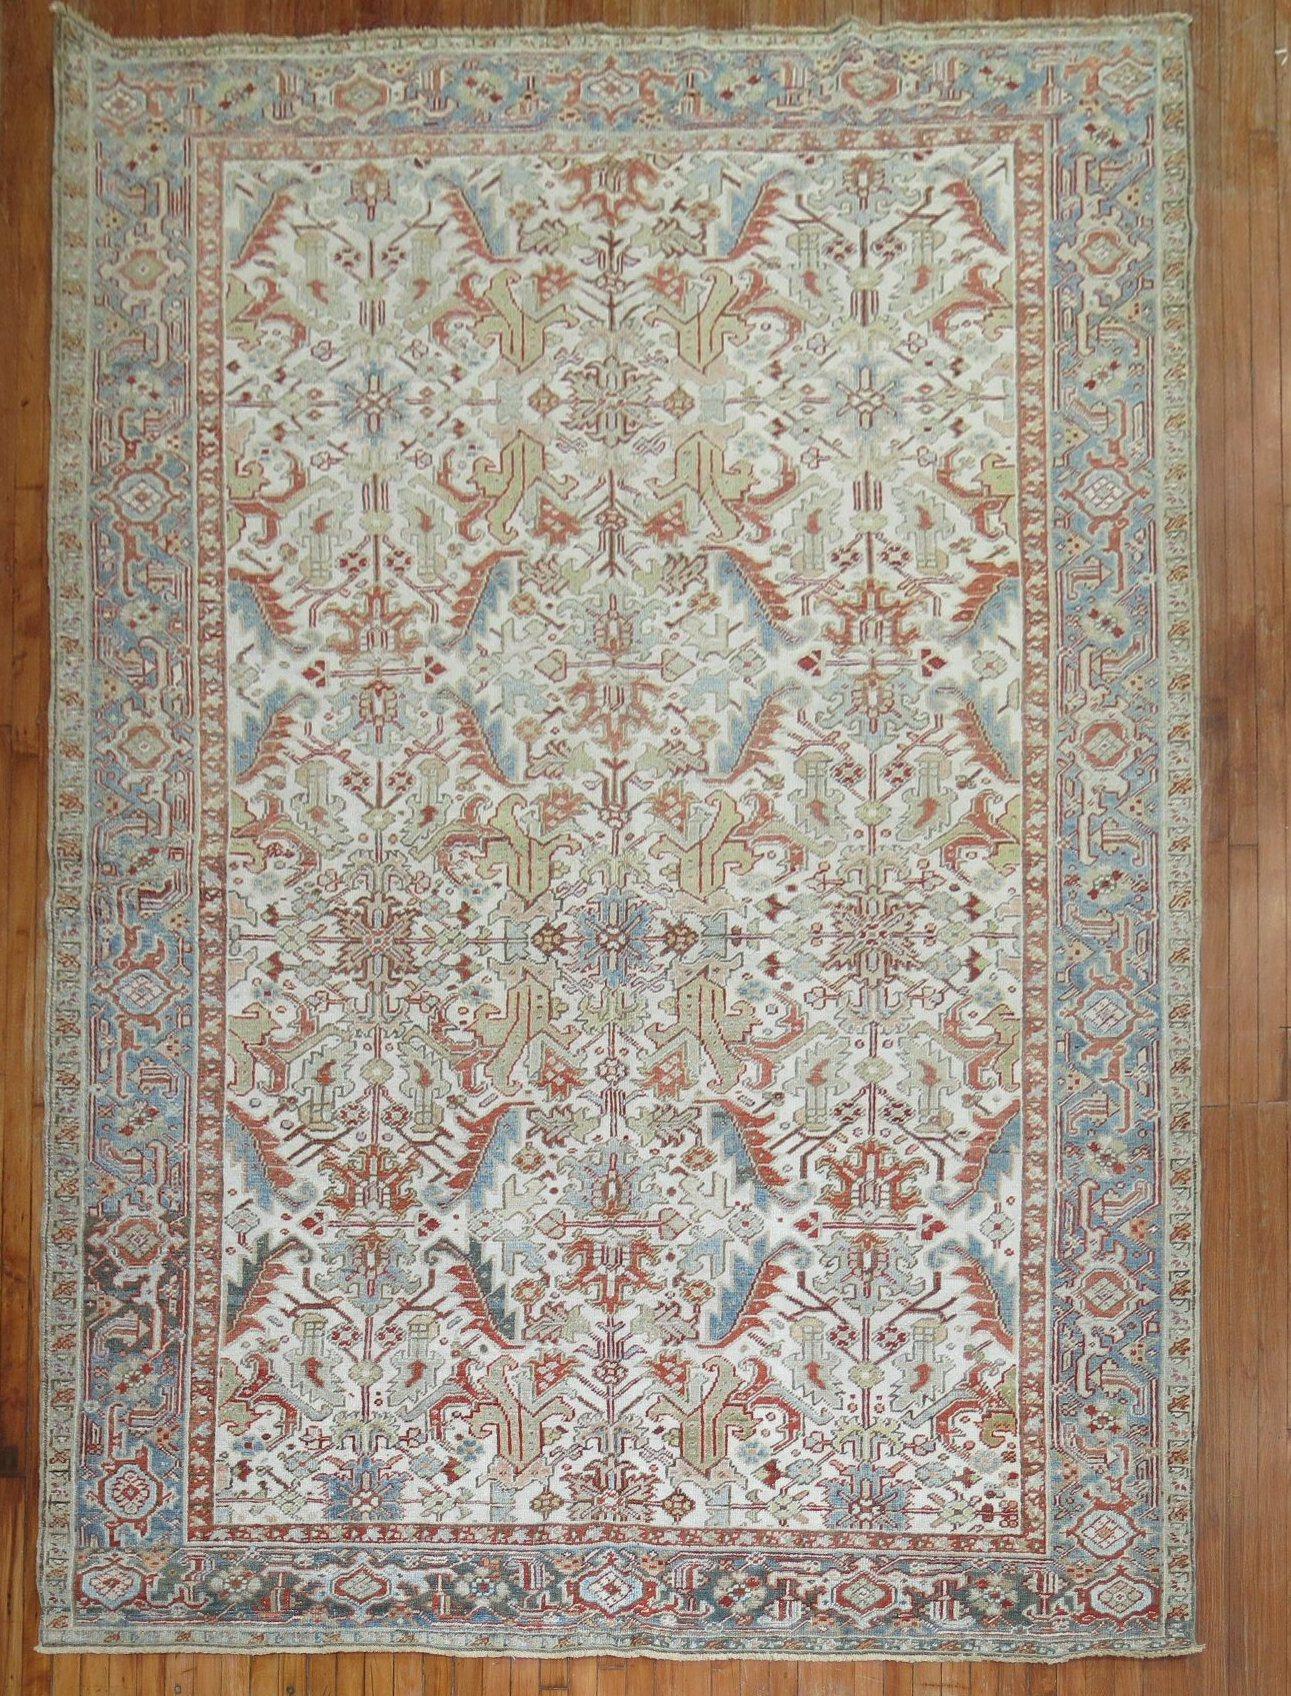 Wonderful antique Persian Heriz Rug with an all-over geometric design on an ivory ground

7'9'' x 10'9''

The finest antique Persian Serapis are geometric in design with open spacious patterns in subtle colors. The great majority of them ennobled